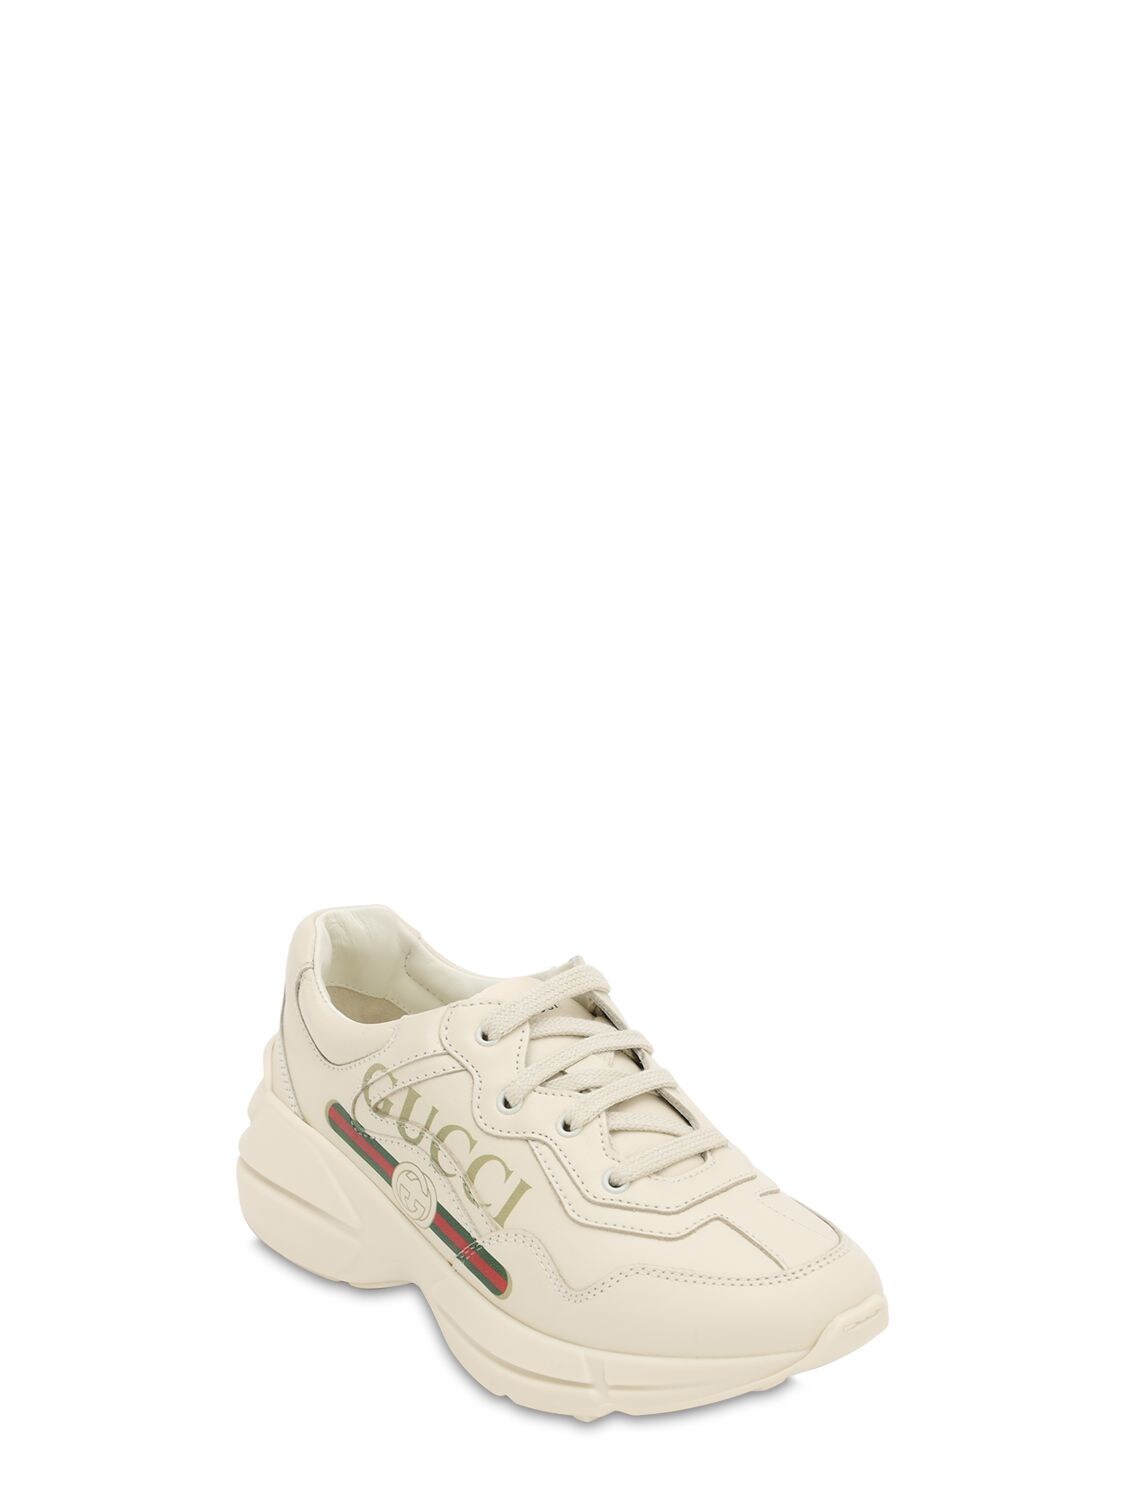 Shop Gucci Logo Print Leather Sneakers In White